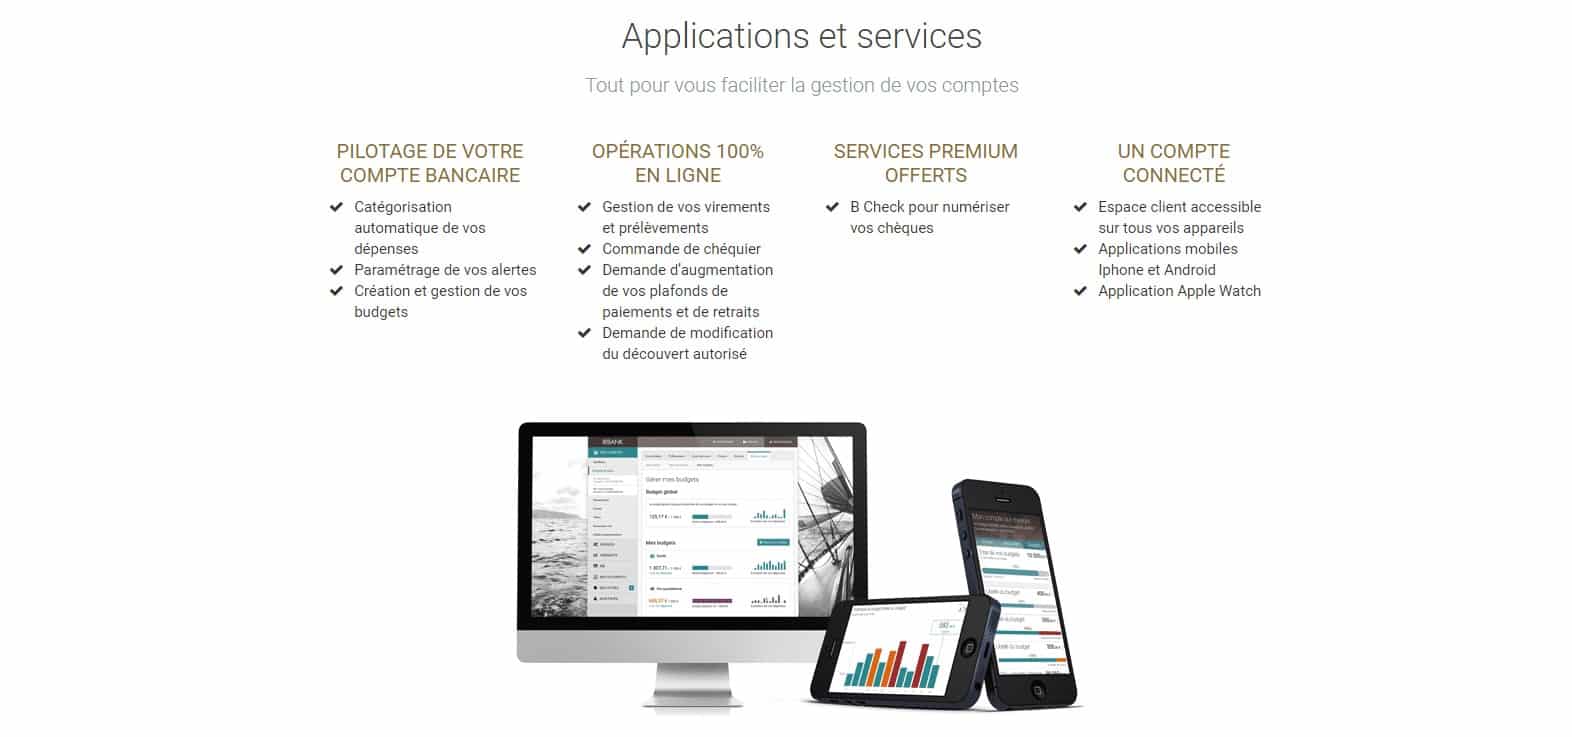 compte-joint-bforbank-application-mobile